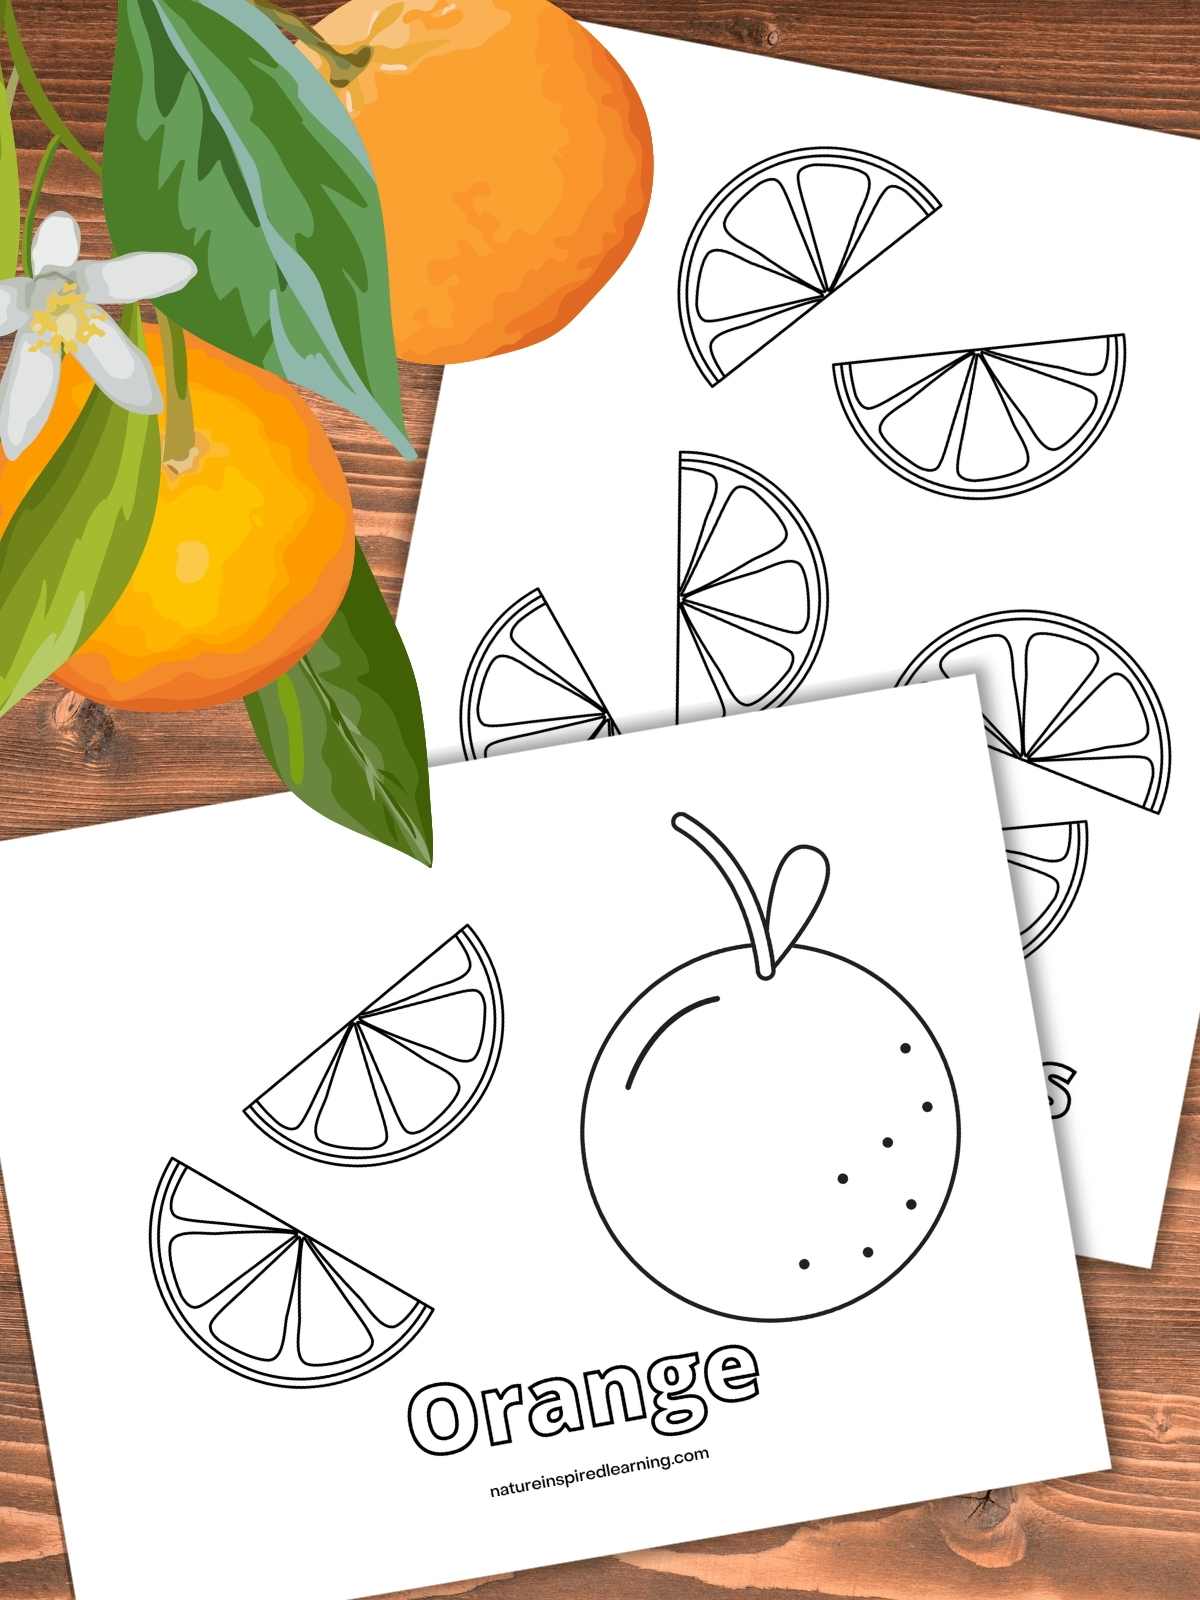 Orange coloring pages and templates